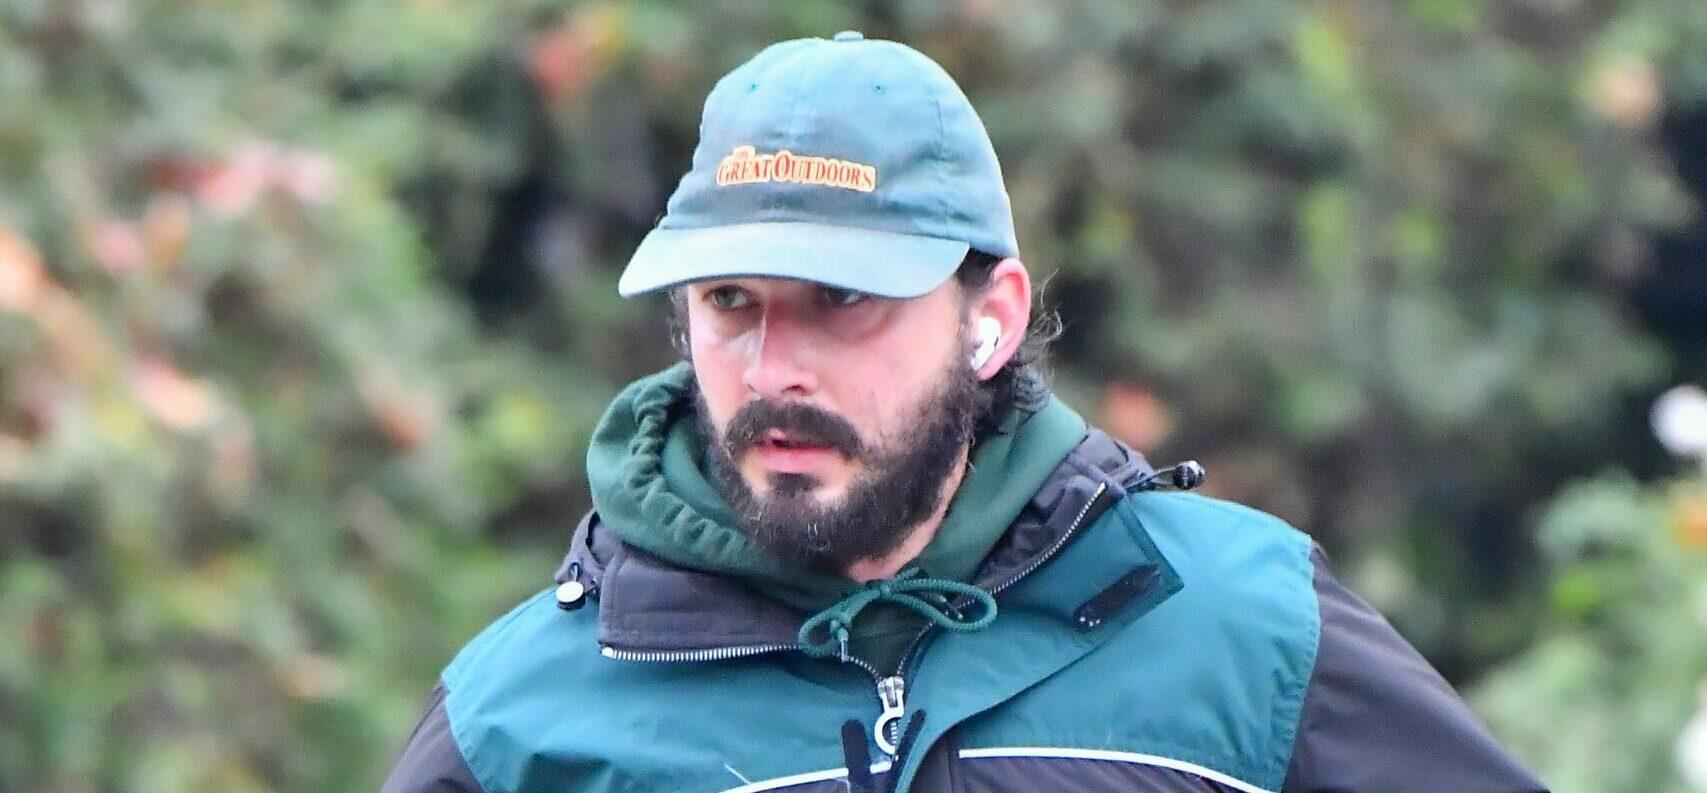 Shia LaBeouf heads out a jog on the day after being hit by a lawsuit by his ex FKA Twigs for sexual battery